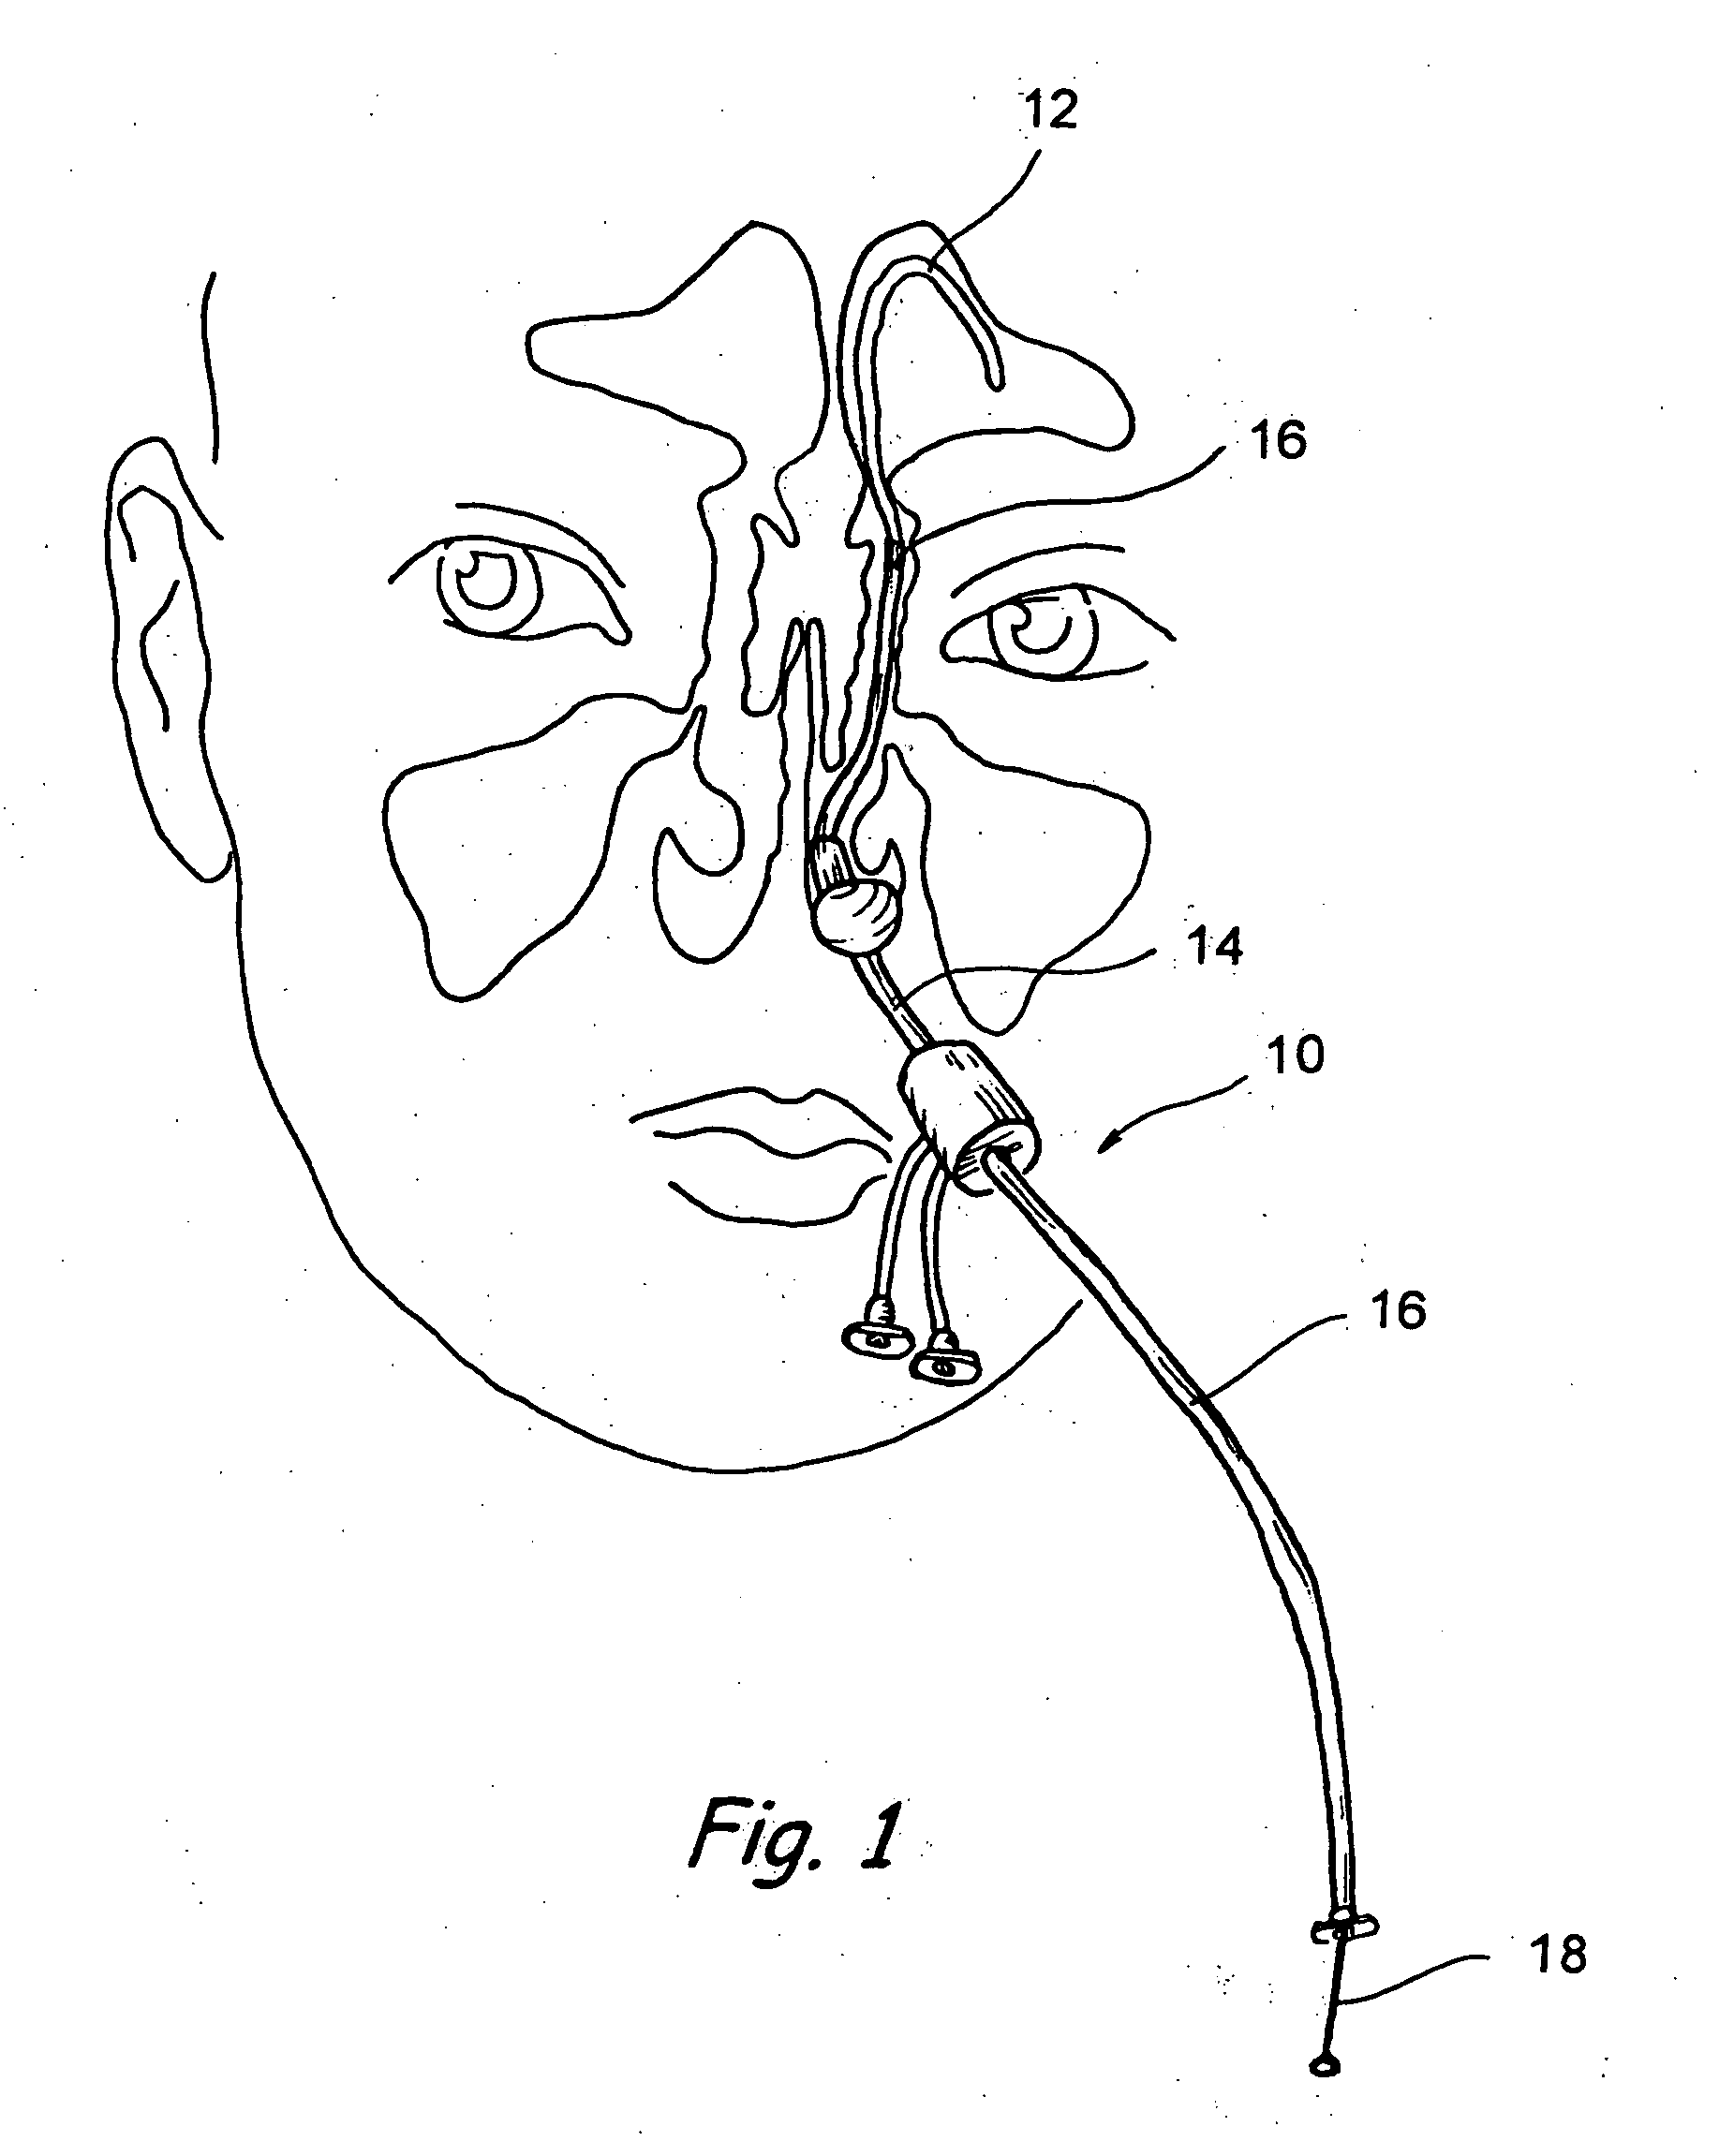 Implantable device and methods for delivering drugs and other substances to treat sinusitis and other disorders